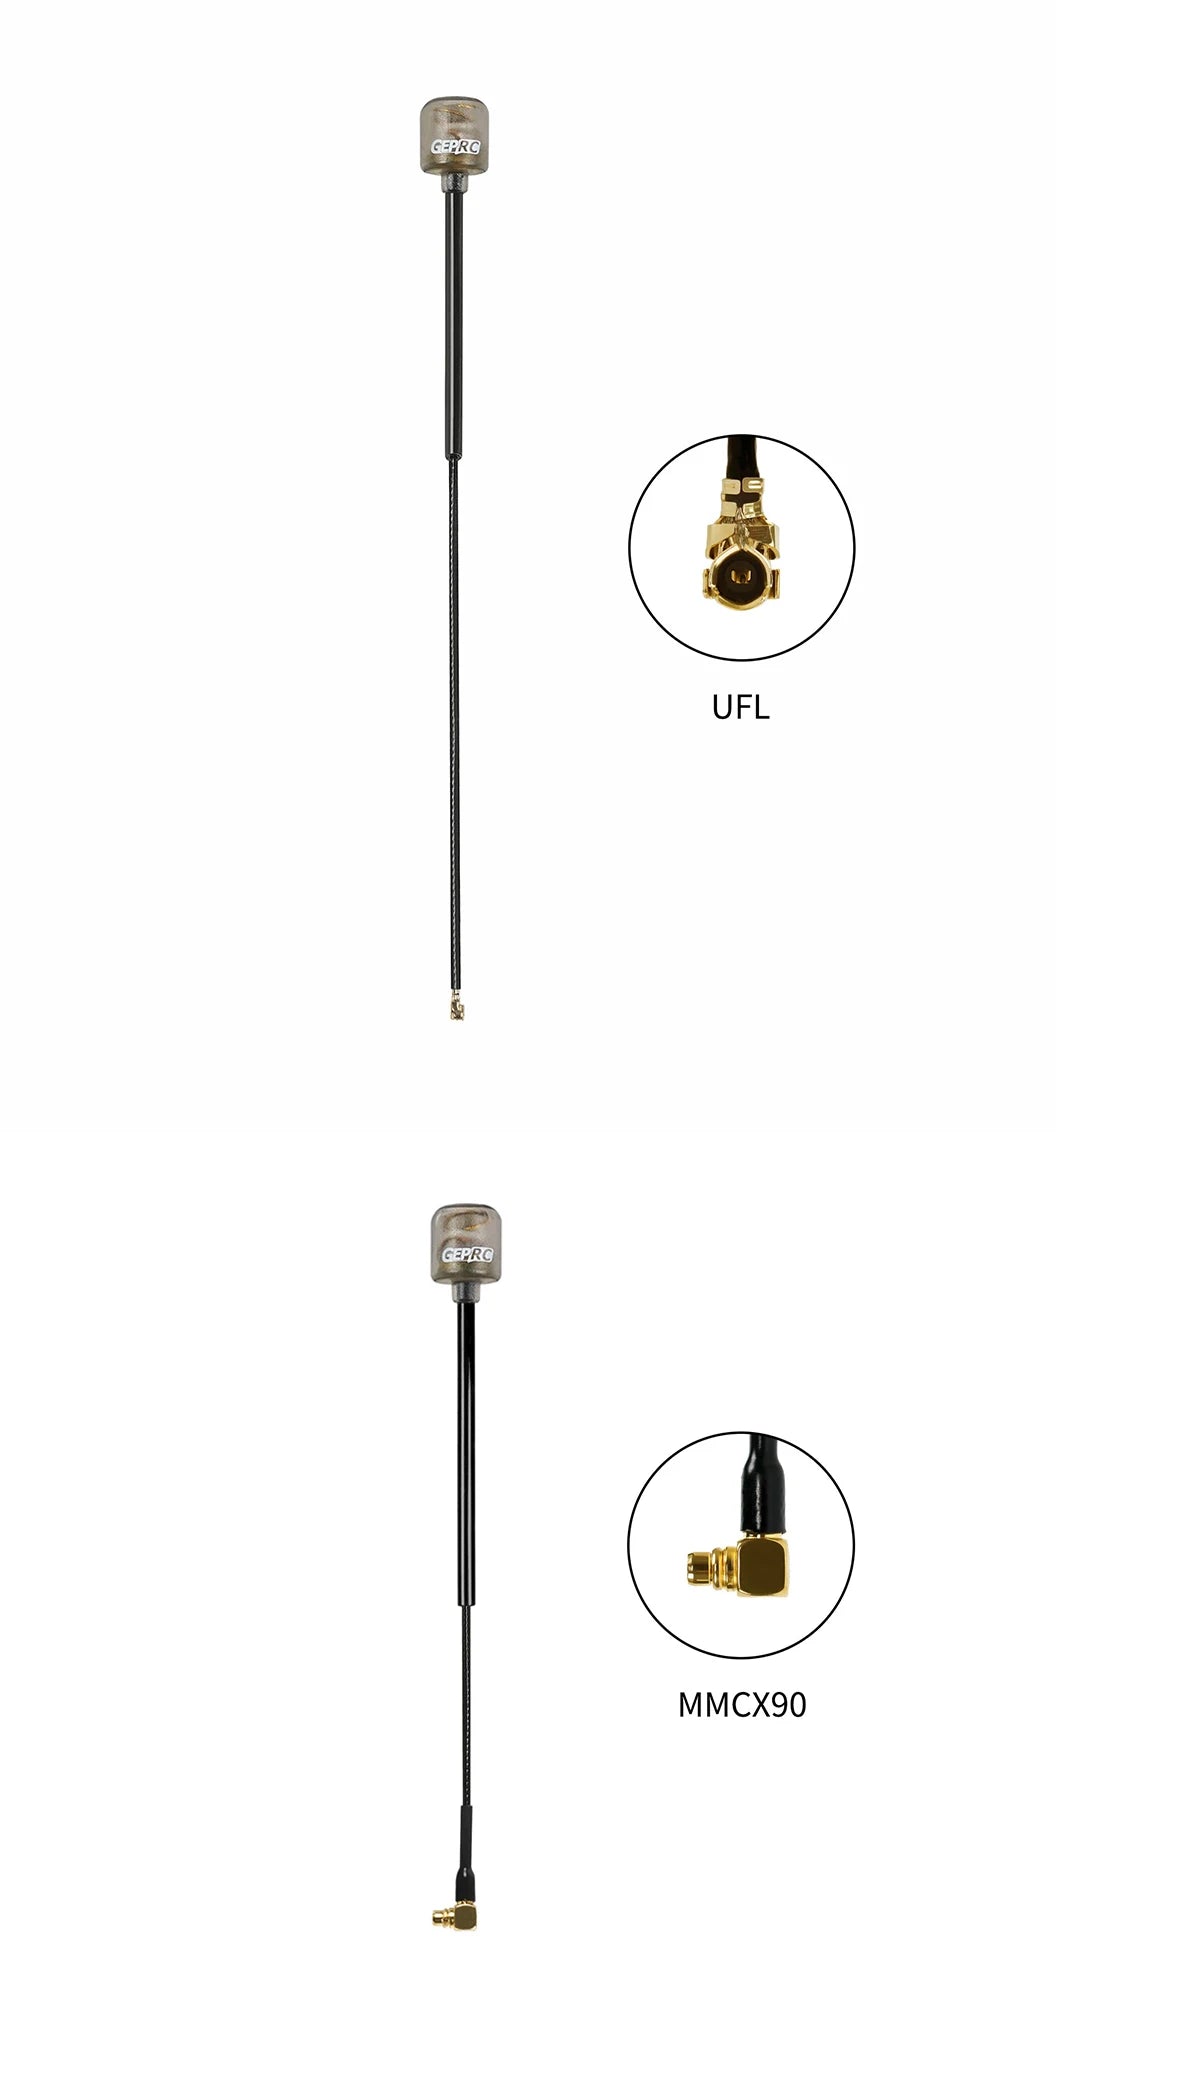 the antenna has good gain performance and very compact